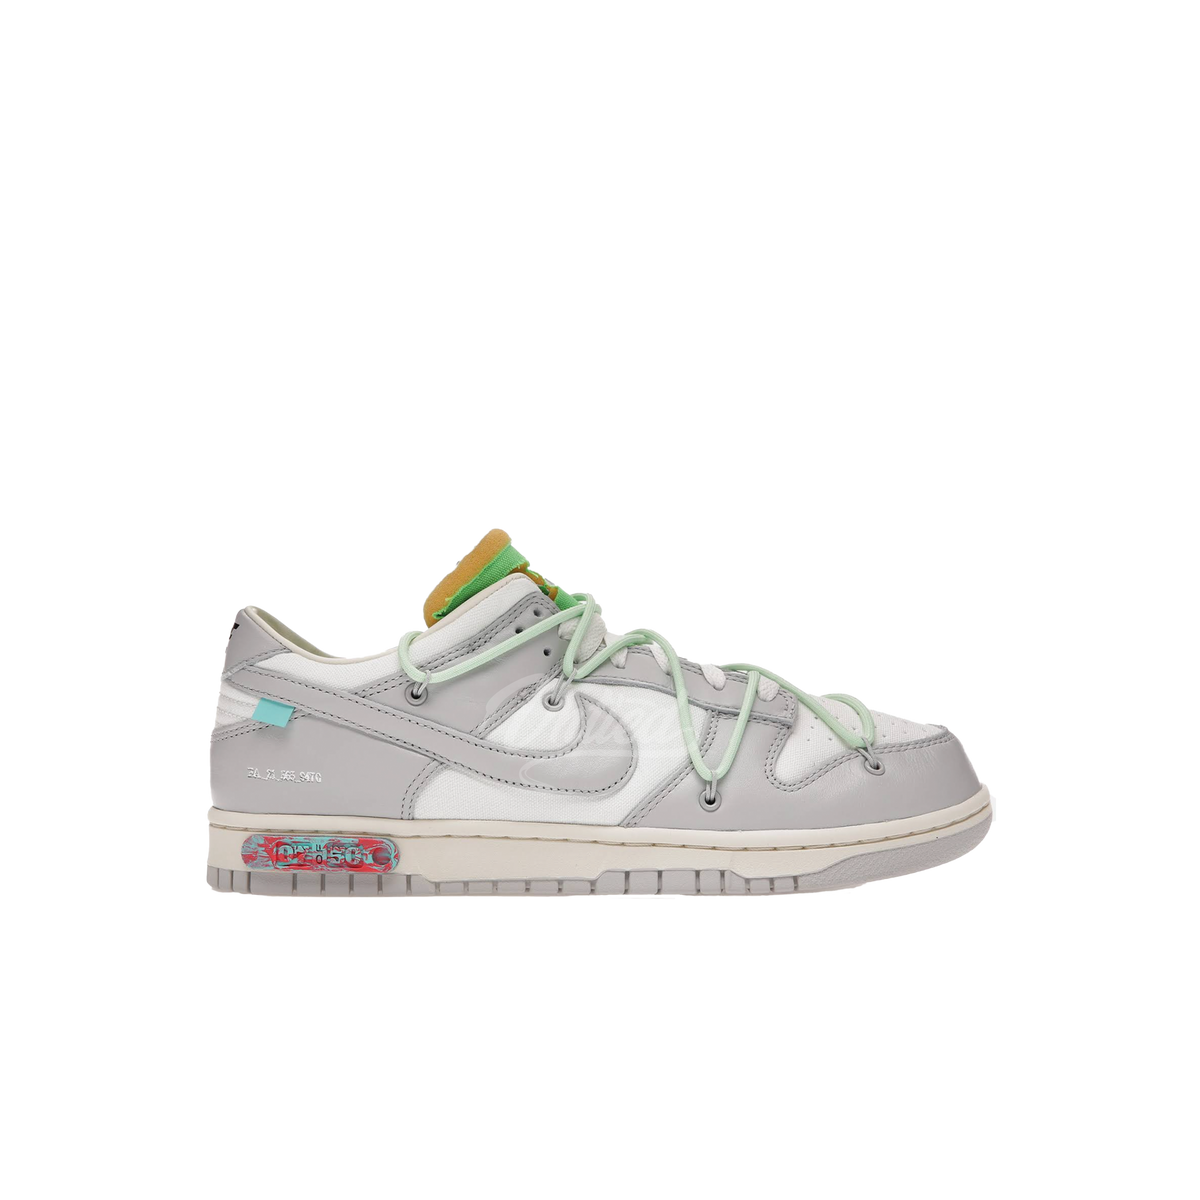 Off-White Nike Dunk Low "Lot 7"